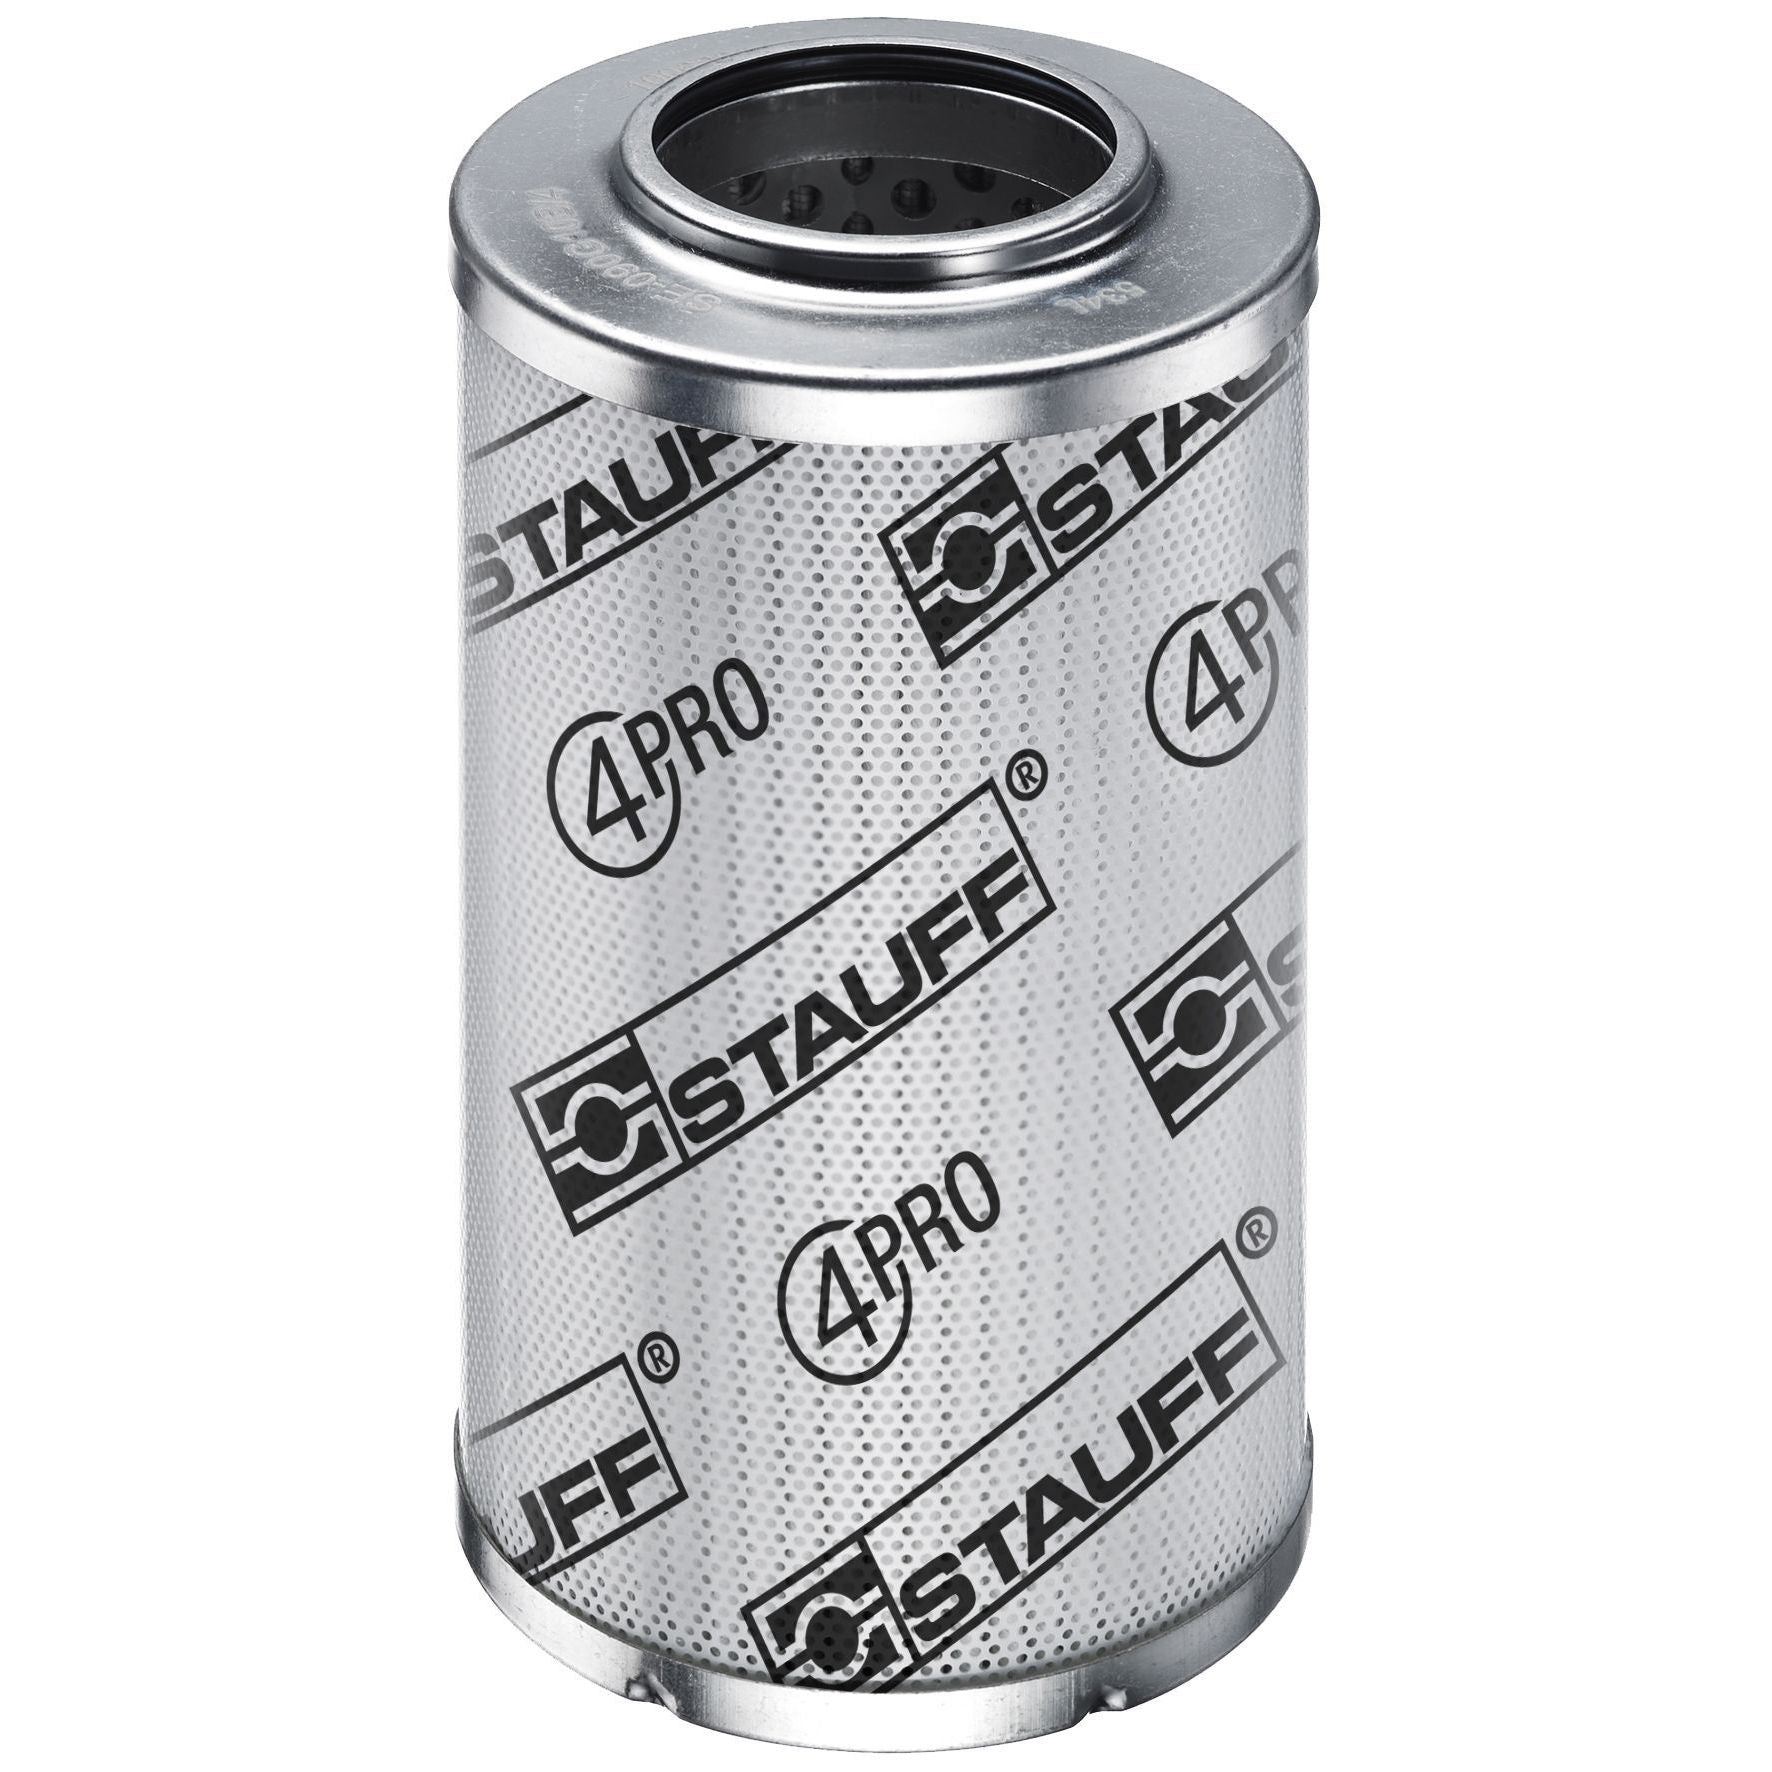 SE-130-G-10-B/4 : Stauff SF-130 Series Filter Element, 10 Micron, Synthetic, 363psi Collapse Differential, Buna